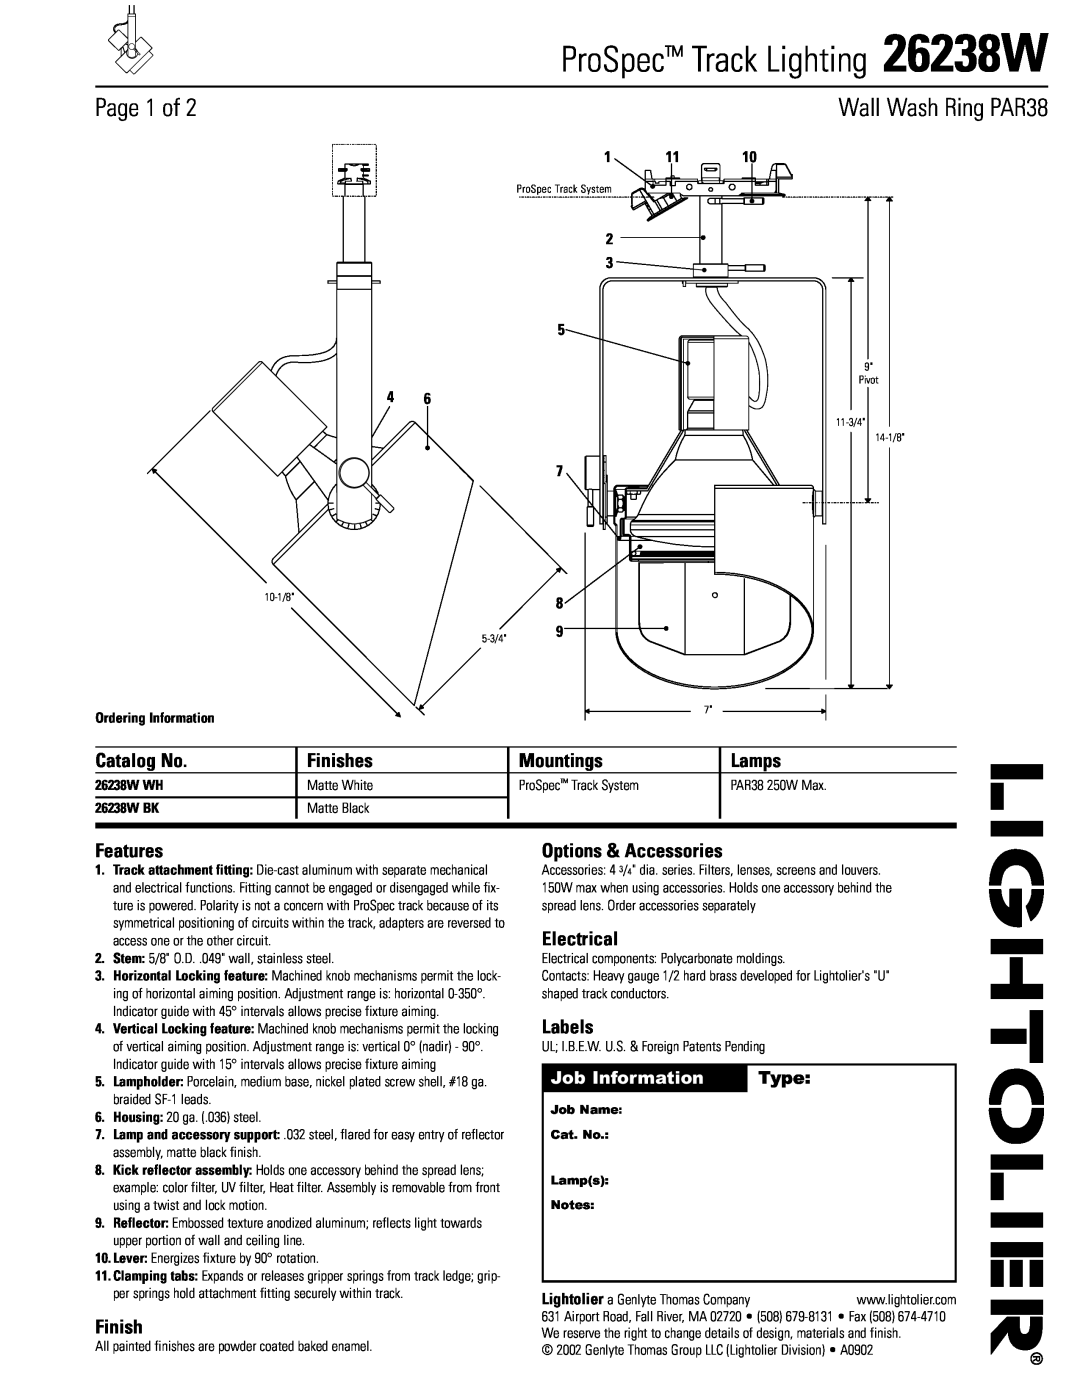 Lightolier manual Wall Wash Ring PAR38, Job Information, Type, Mountings, ProSpec Track Lighting 26238W, Page 1 of 